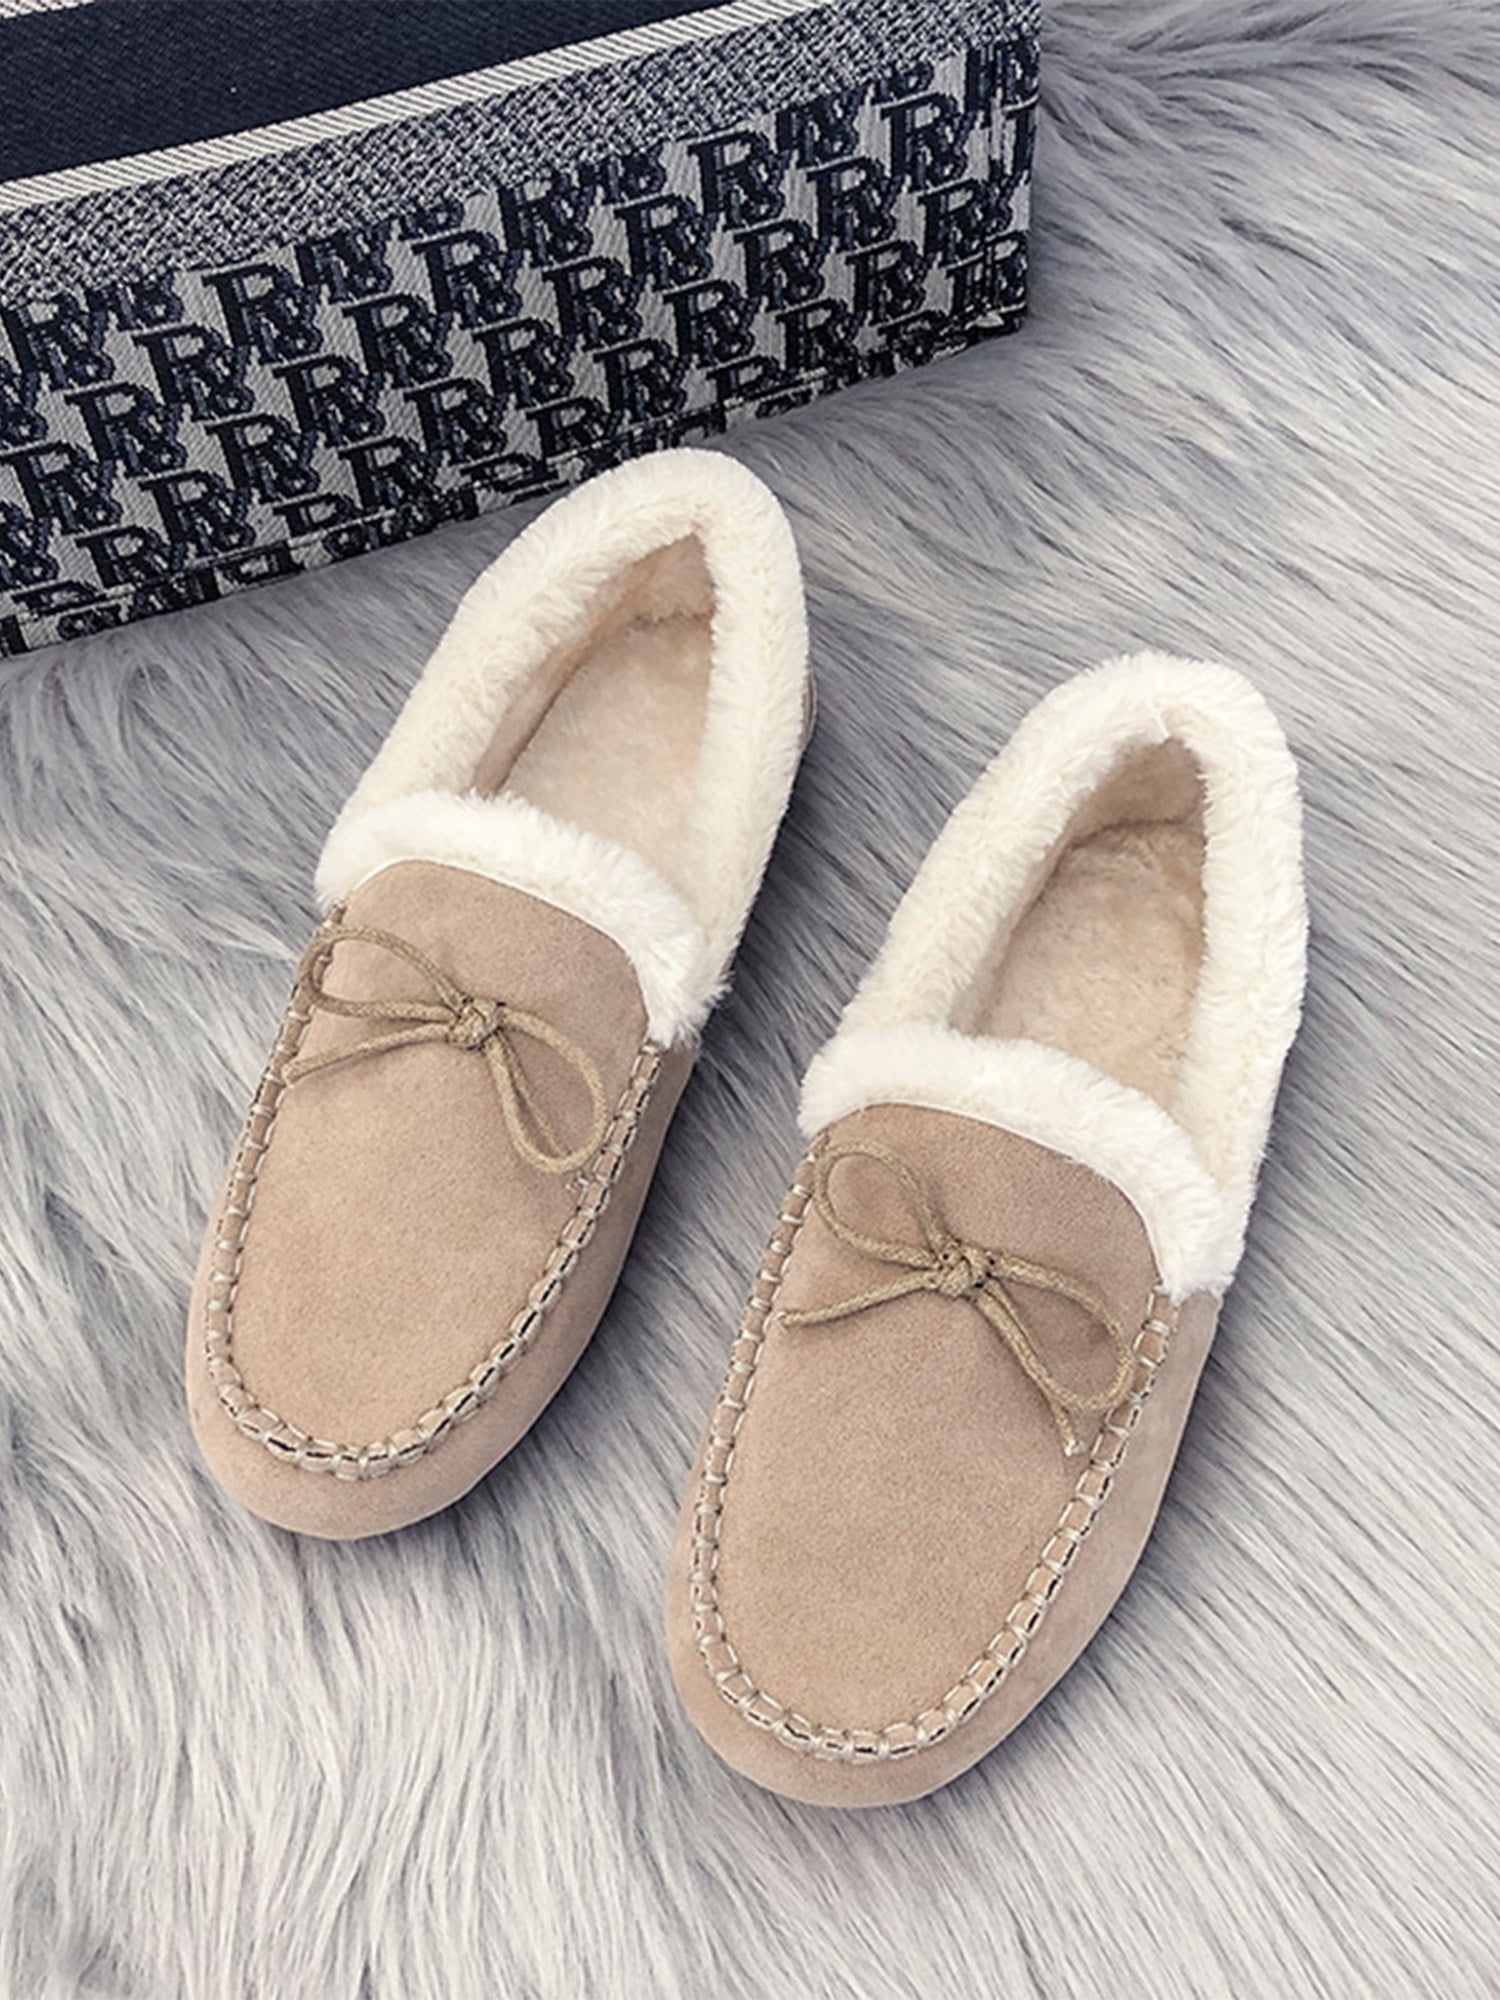 Made in the UK Women's Luxury Pink Sheepskin Moccasin Wool Lined & Soft Sole 